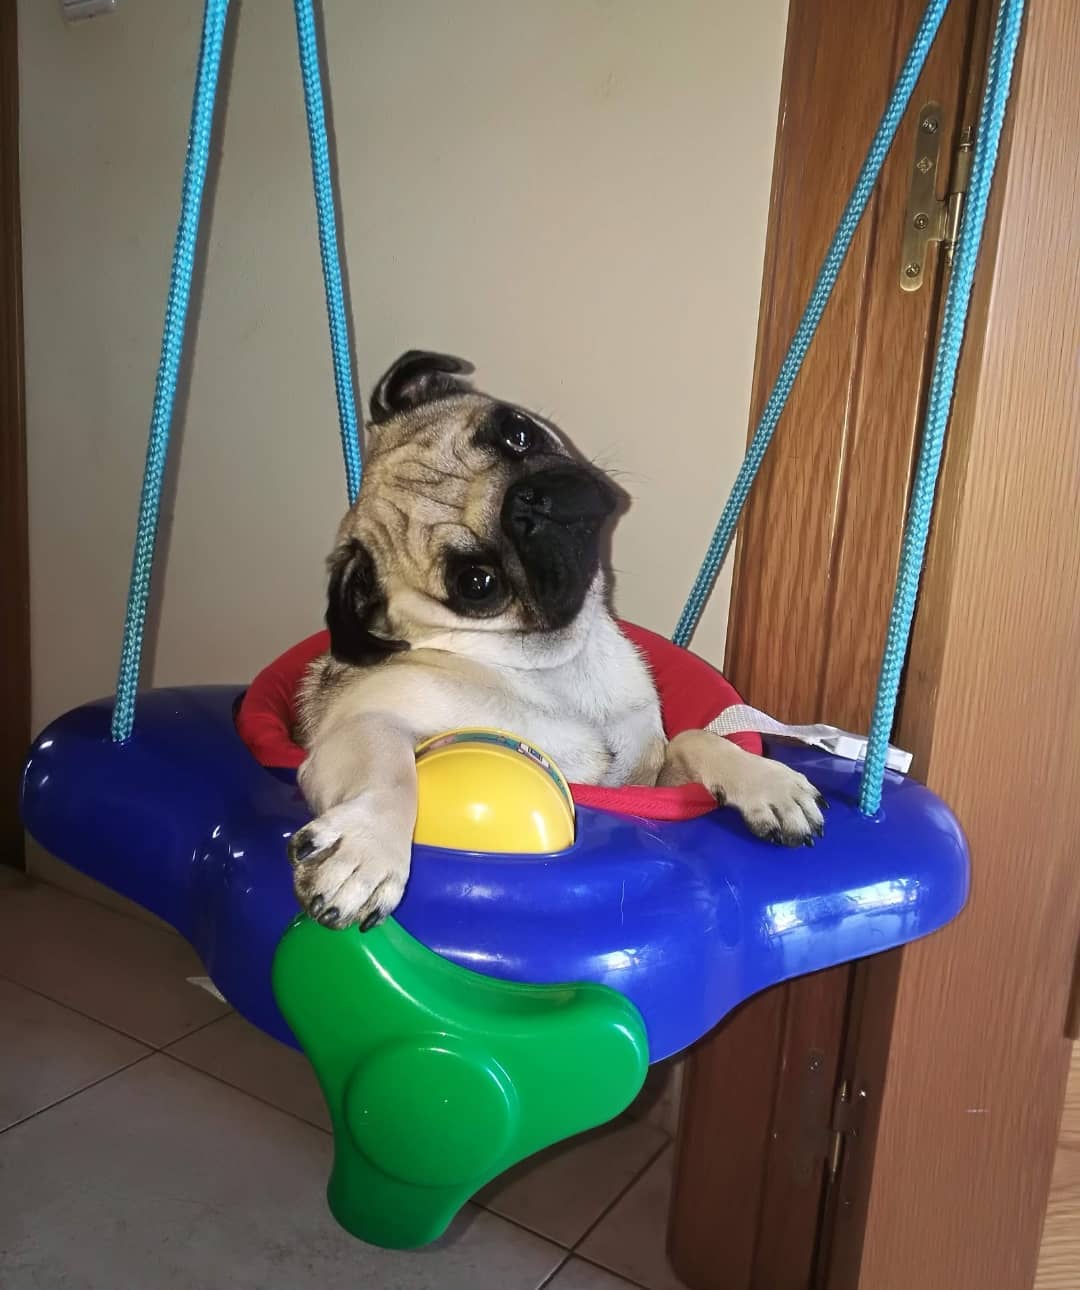 A Pug sitting in a toddler swing